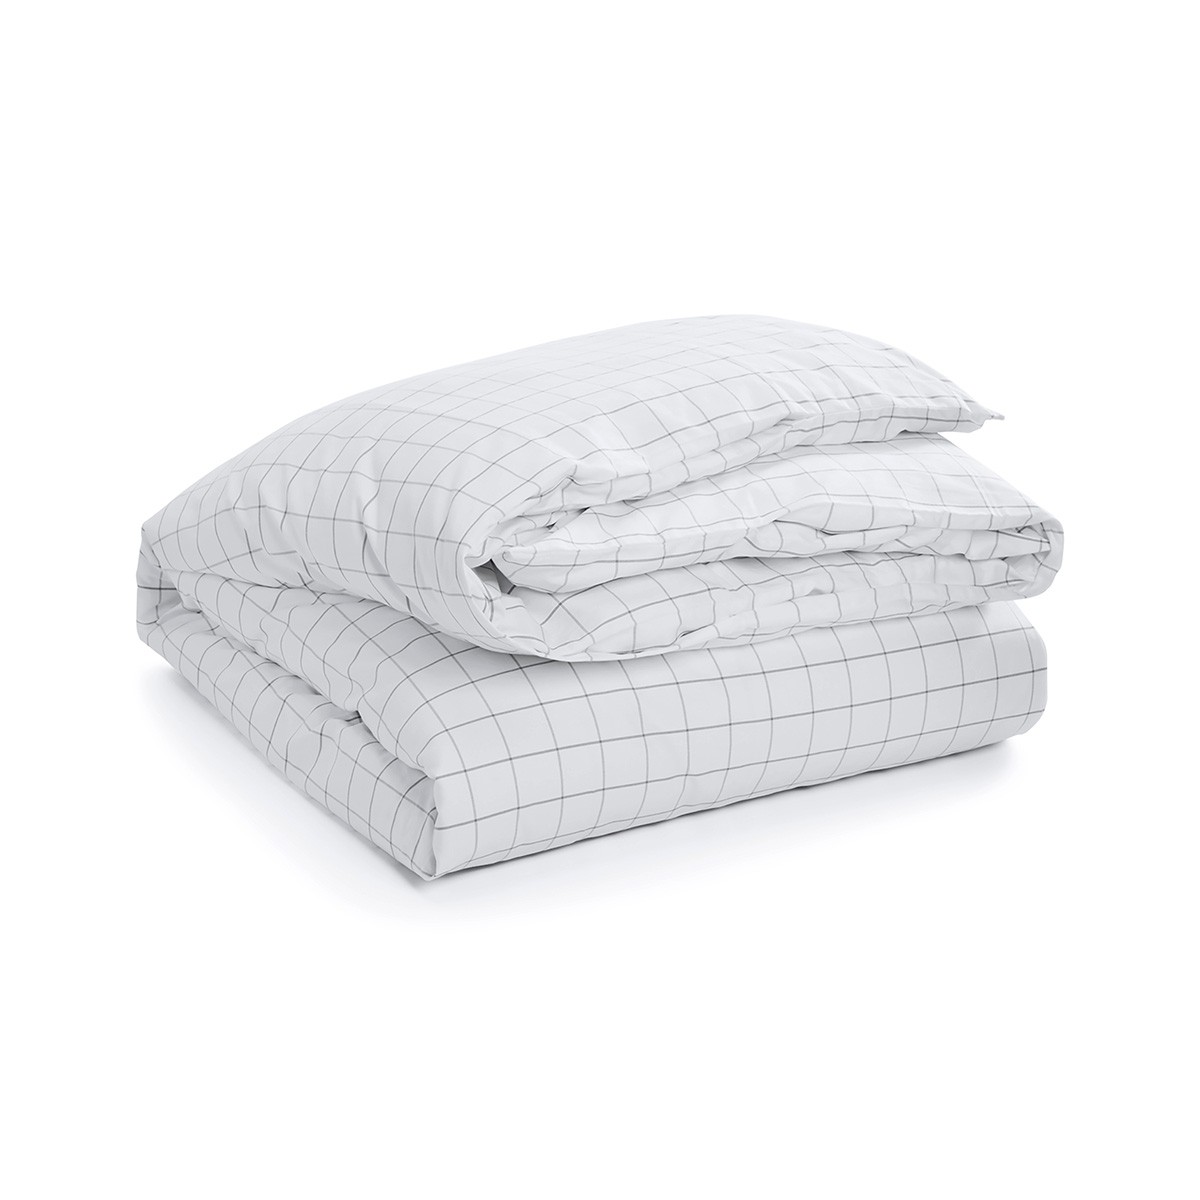 Bed Linen Baxter Charcoal Charcoal